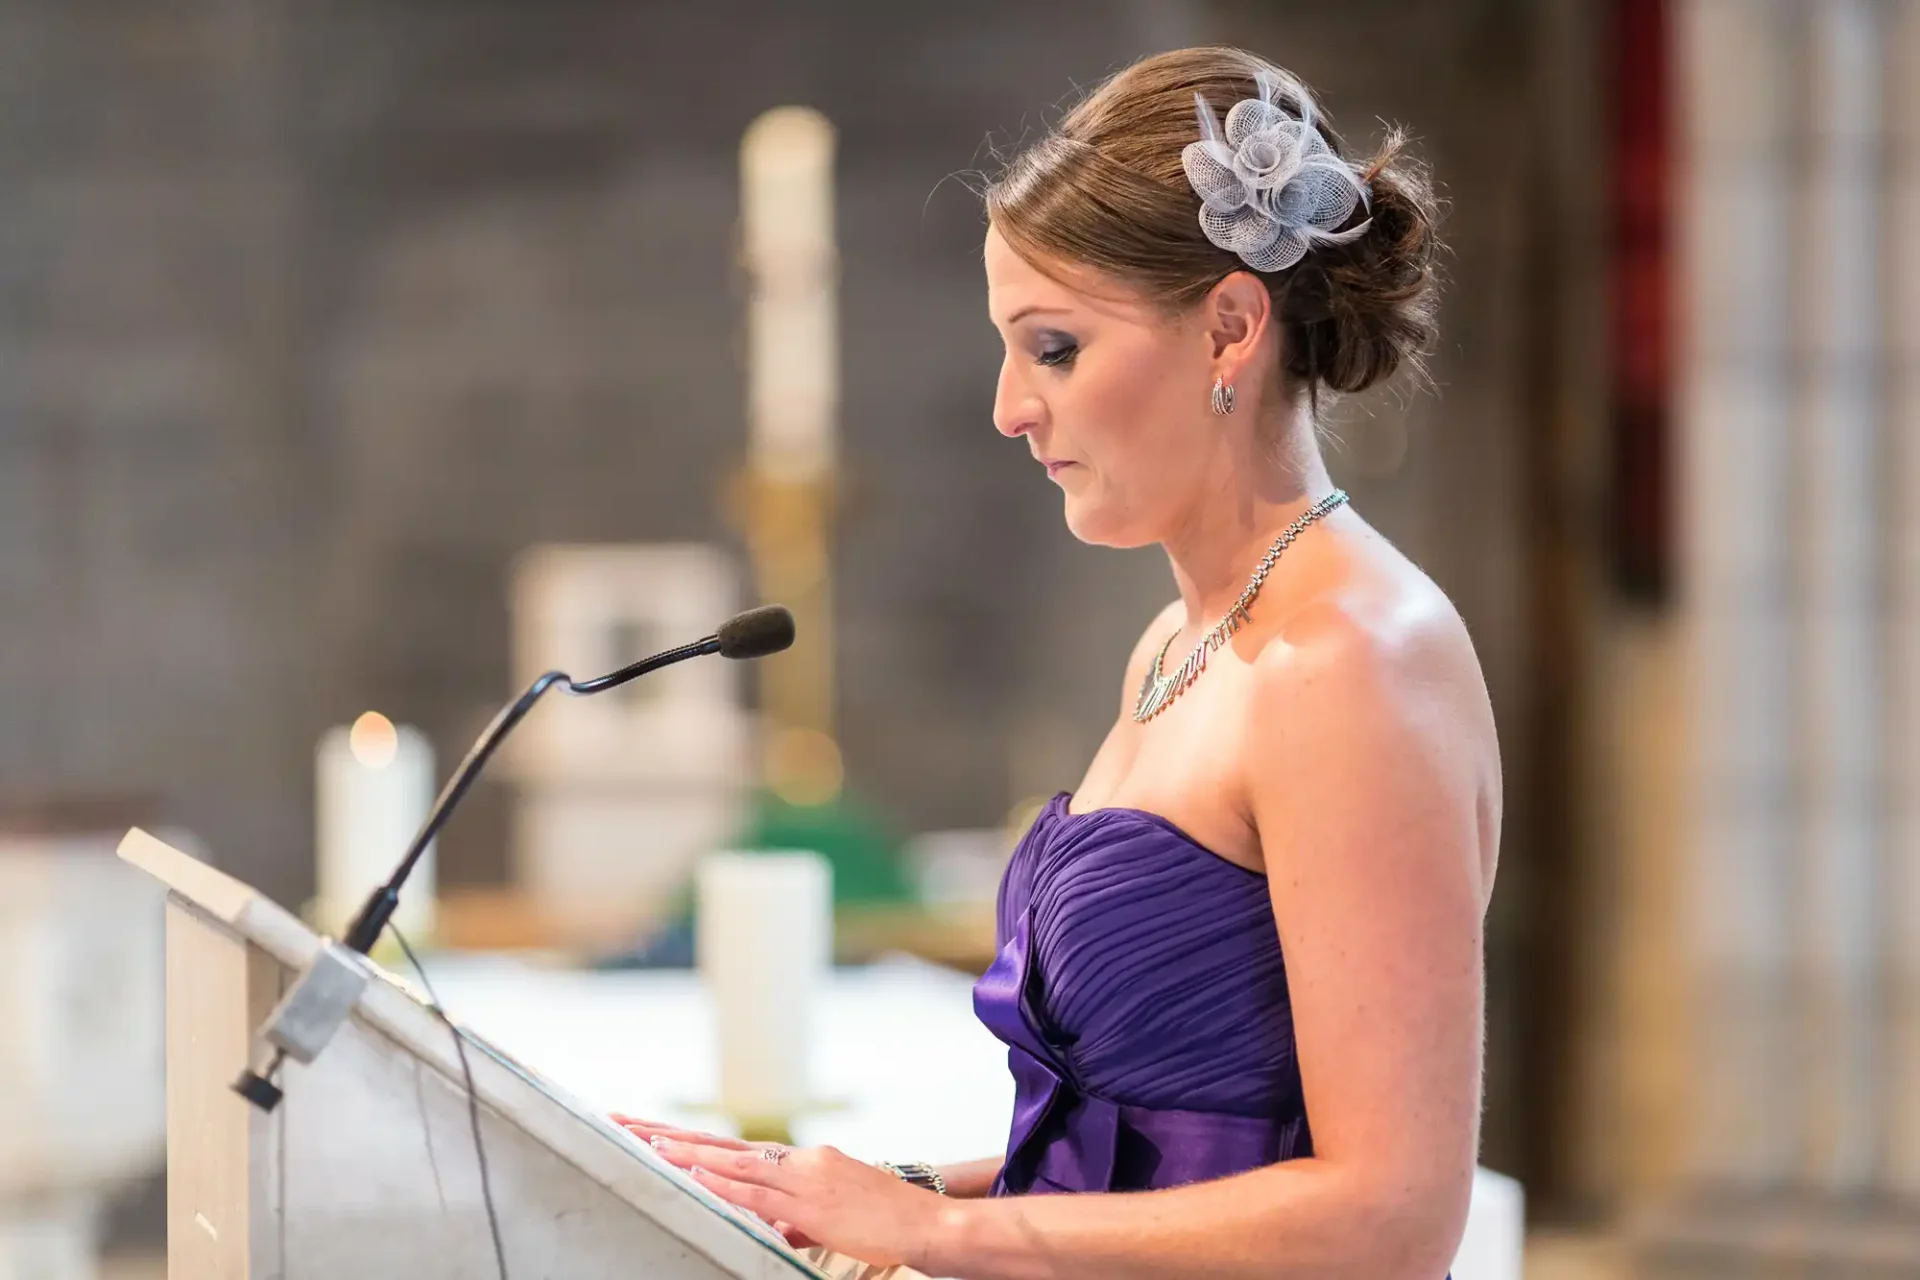 A woman in a purple dress with an ornamental flower in her hair speaks at a podium in a softly lit hall.